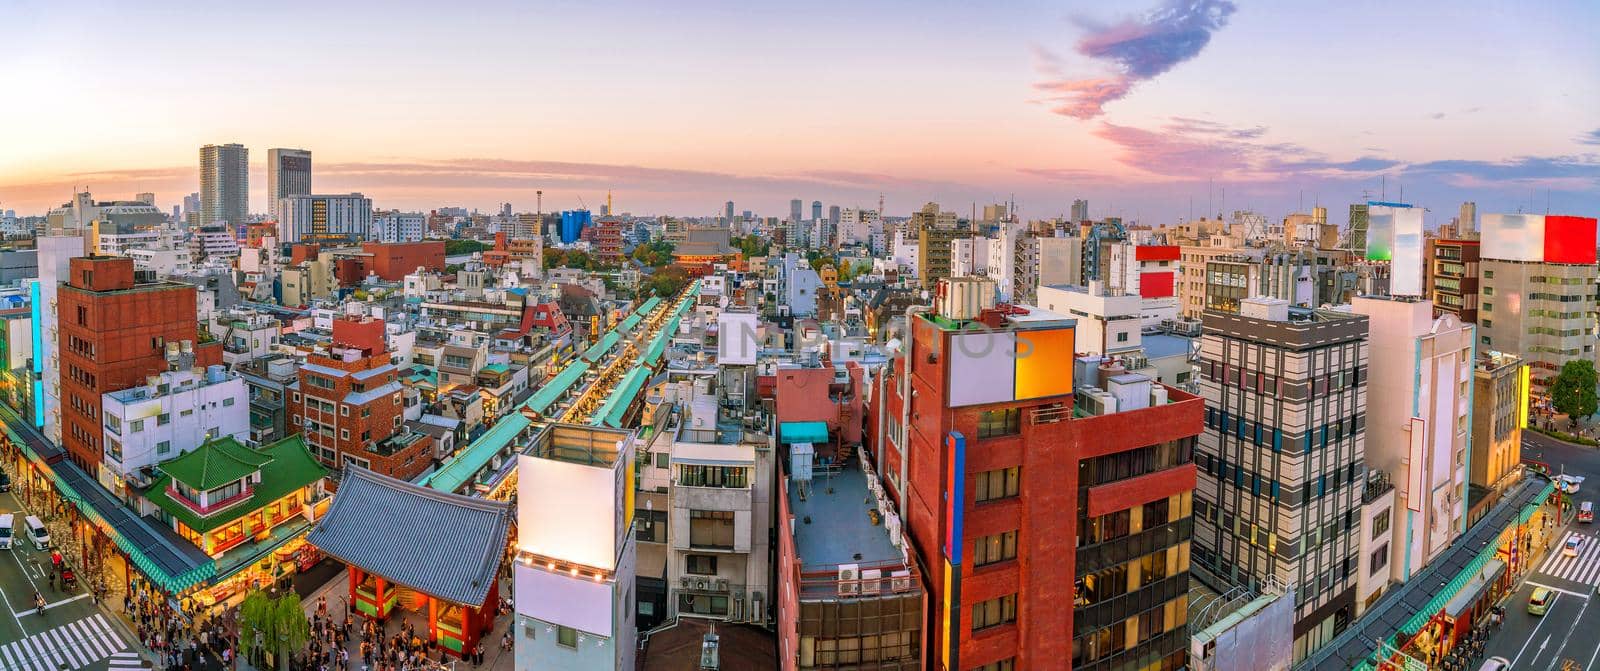 Top view of Asakusa area in Tokyo Japan by f11photo